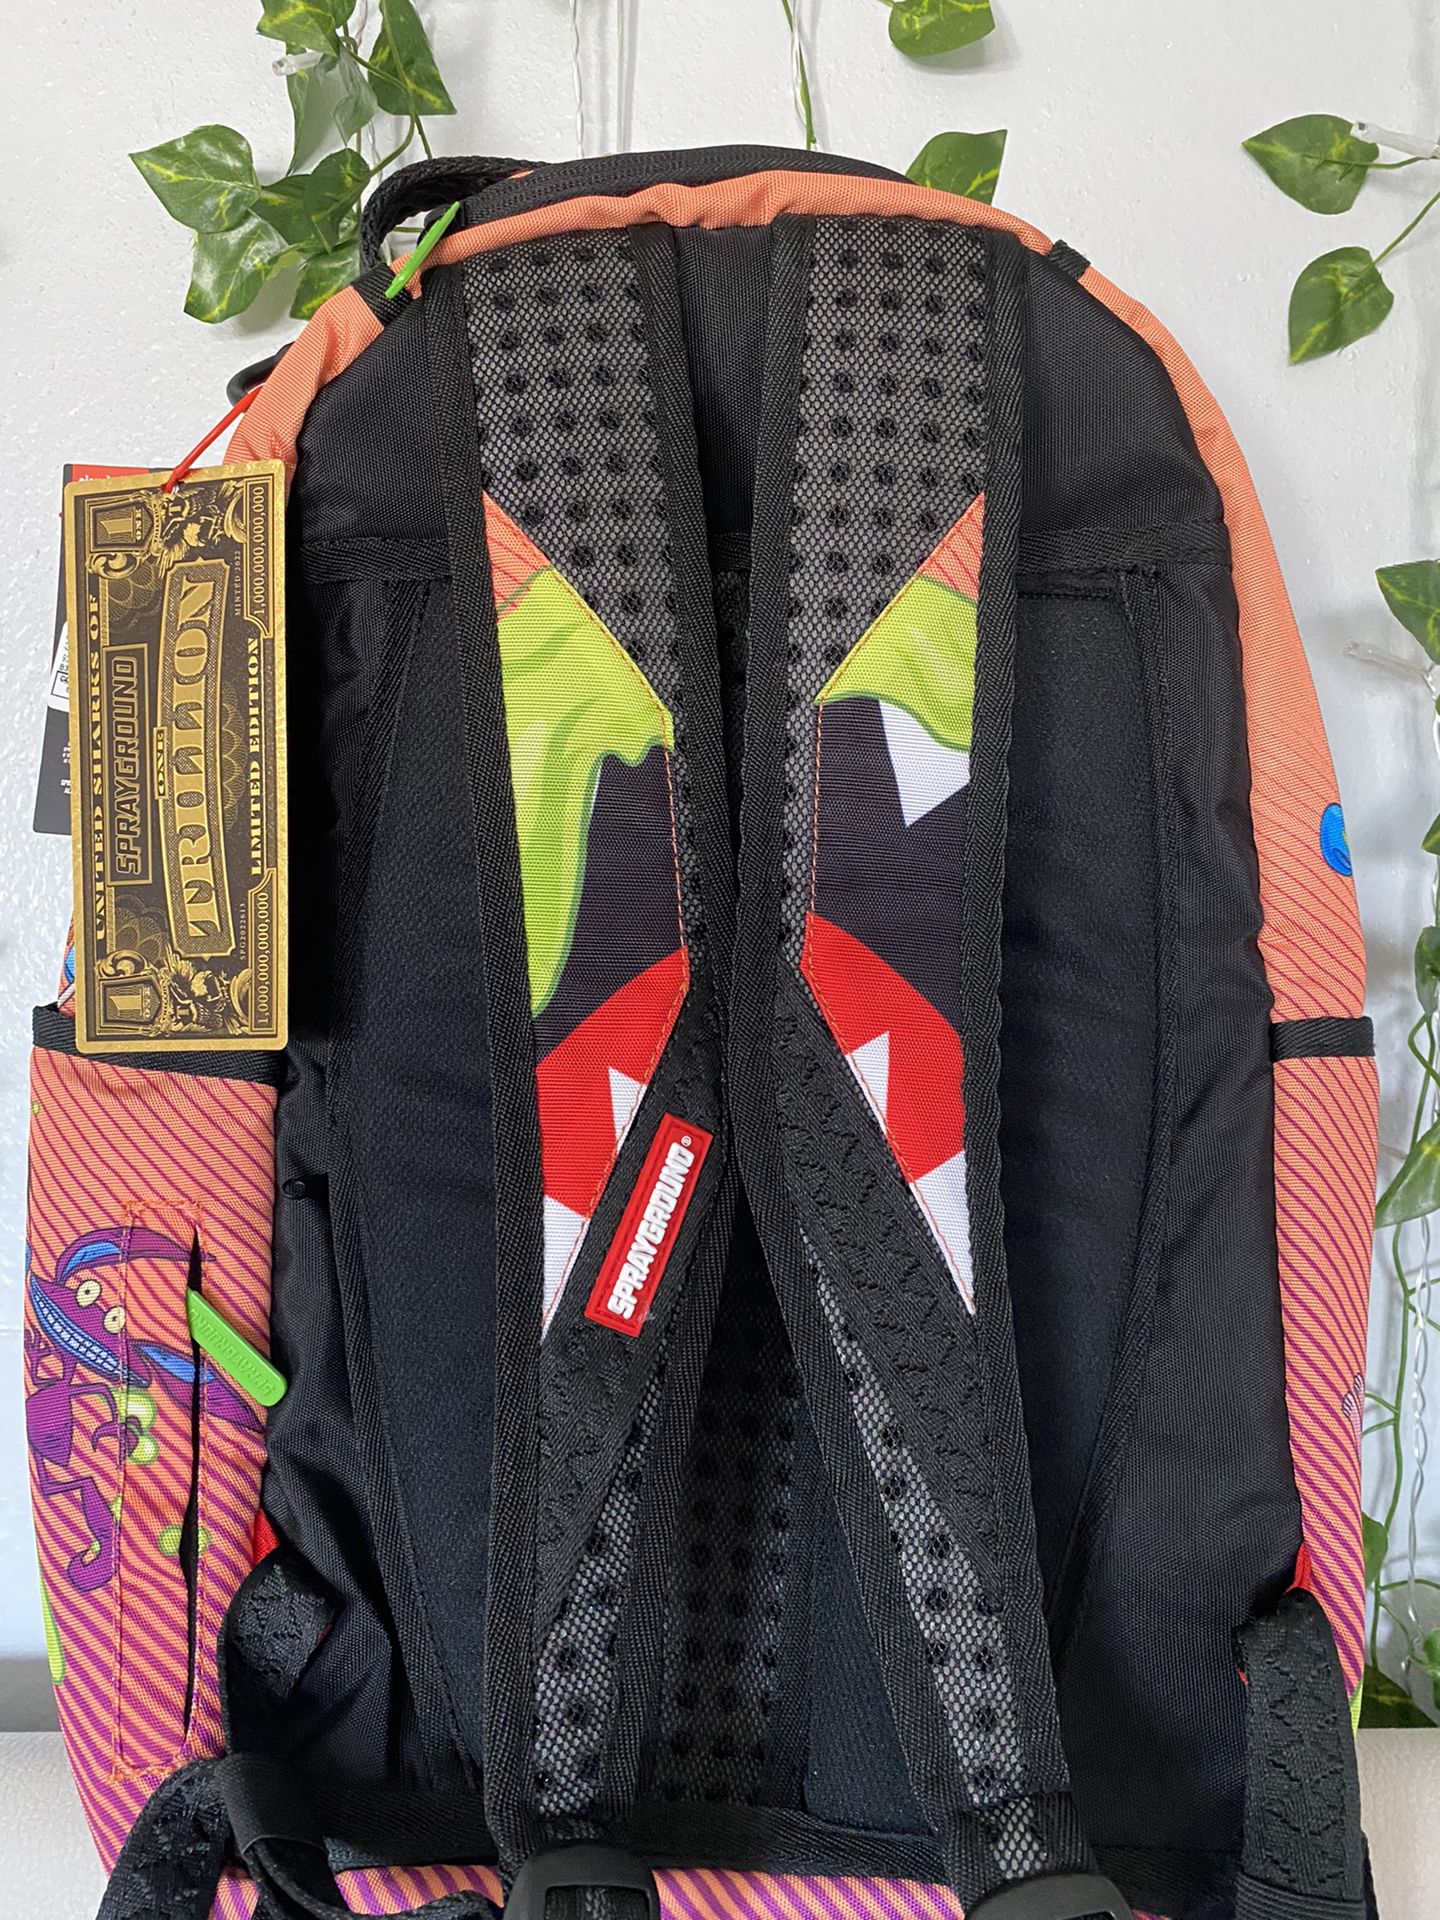 Sprayground Naruto Backpack for Sale in Los Angeles, CA - OfferUp